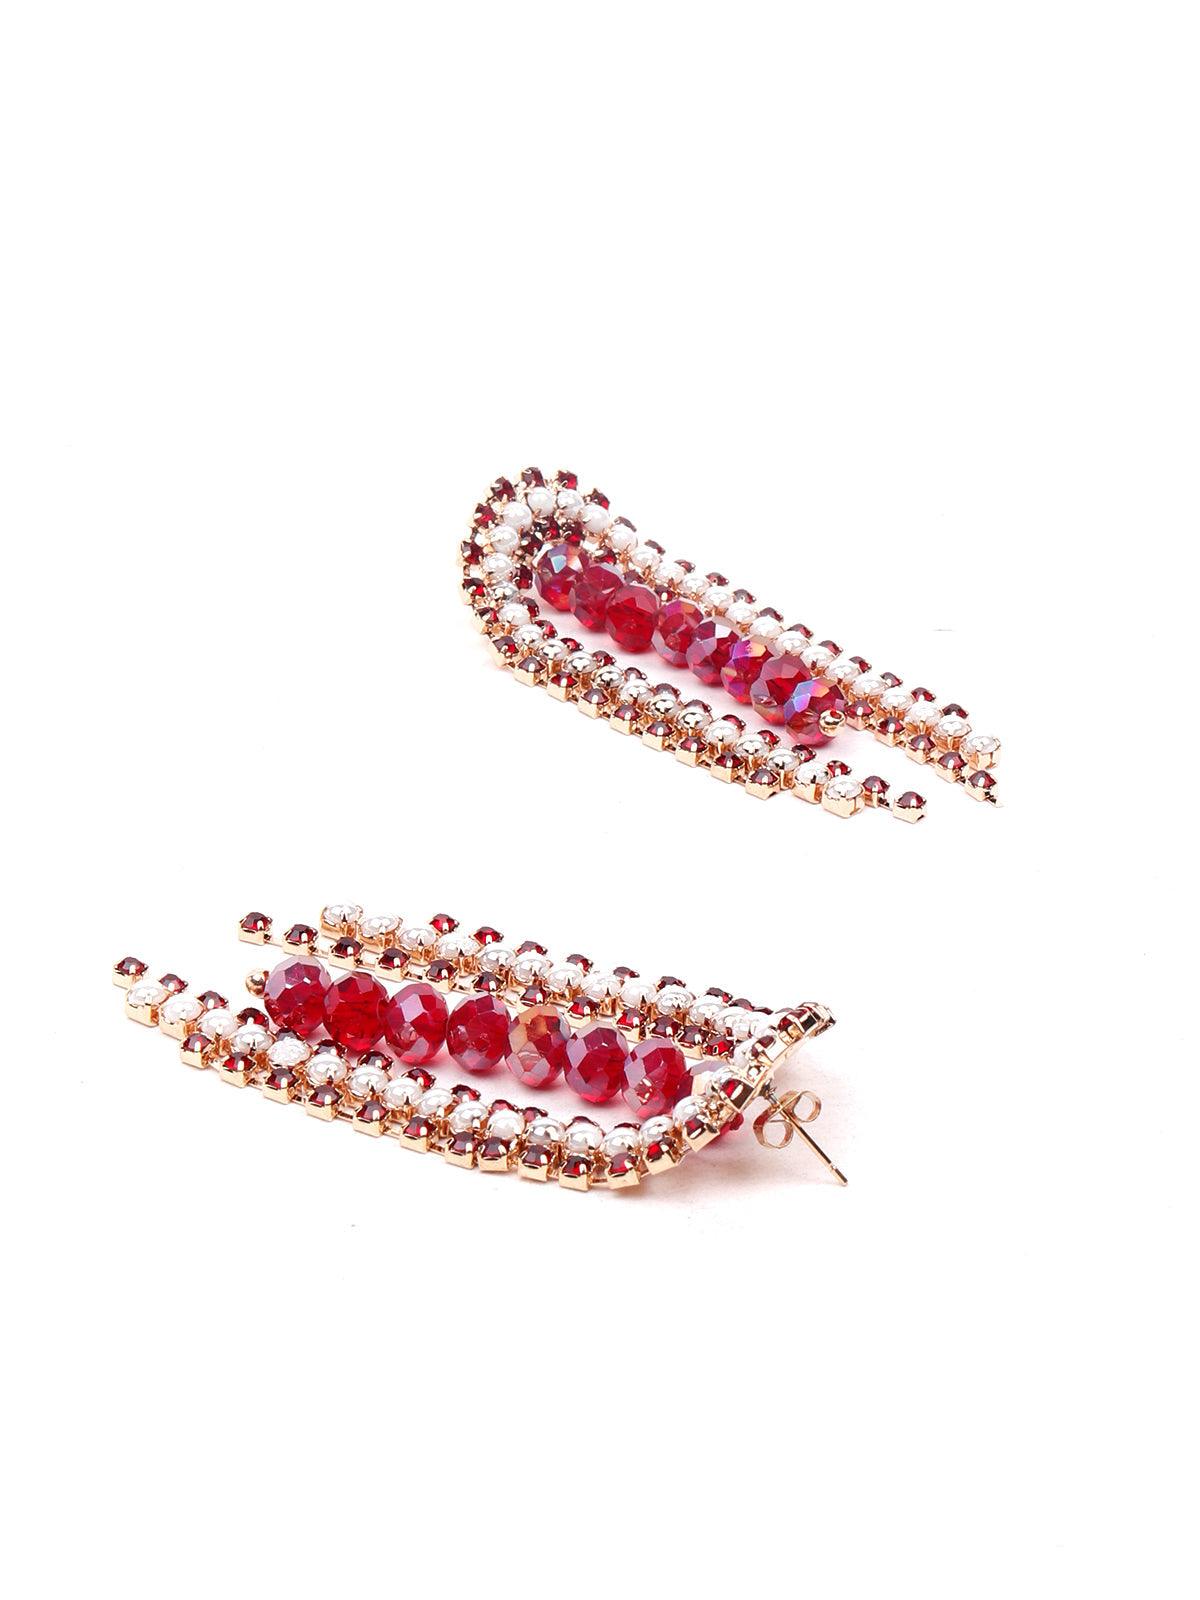 Women's Red And White Loop Statement Earrings - Odette